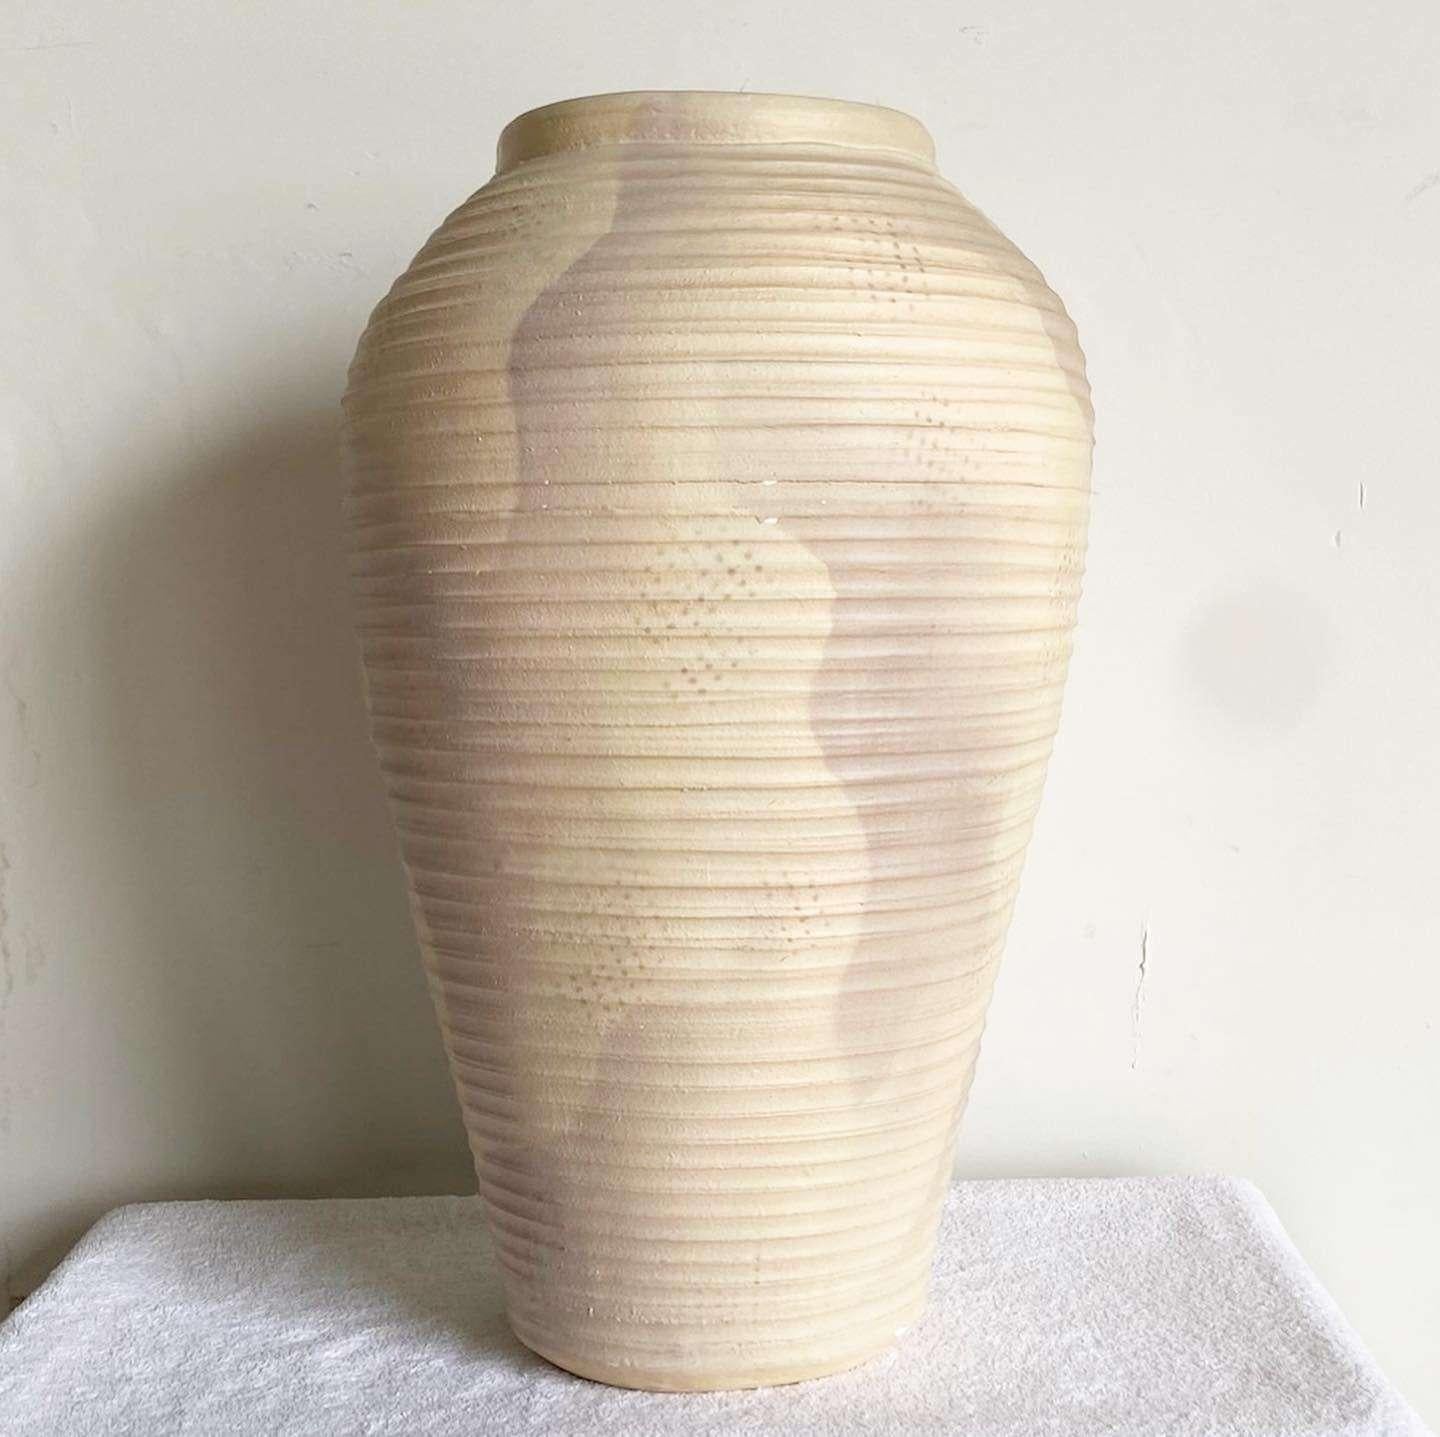 Exceptional vintage postmodern ribbed ceramic floor vase. Features a beige finish with a purple brushed accent.

